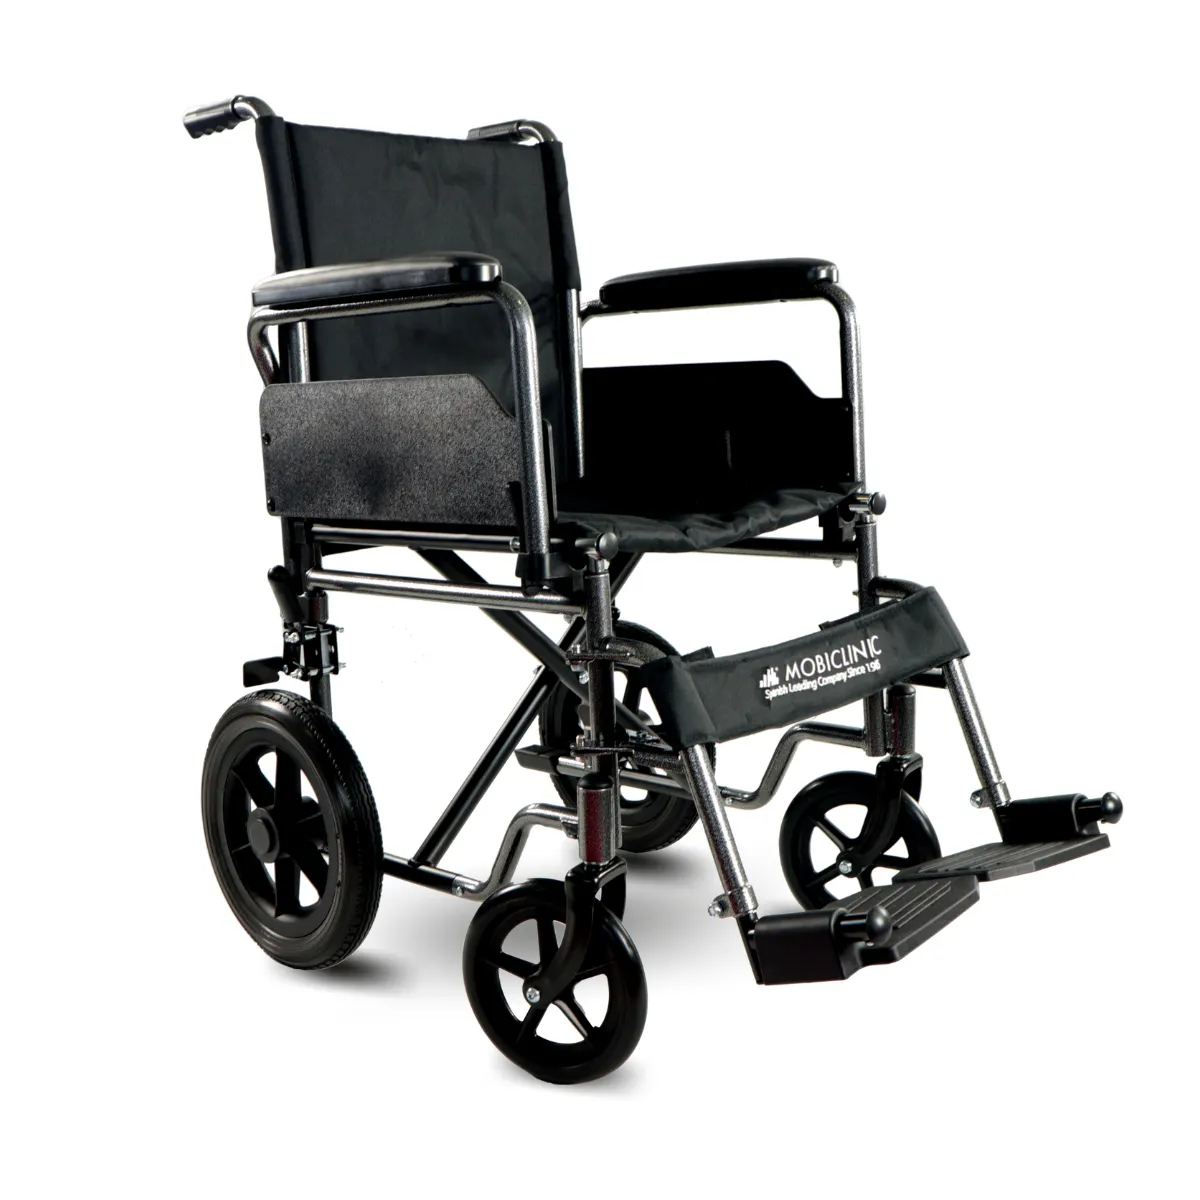 Excellent Offer Spanish Small Rear Aluminium Wheelchair Grey For Wholesale Export